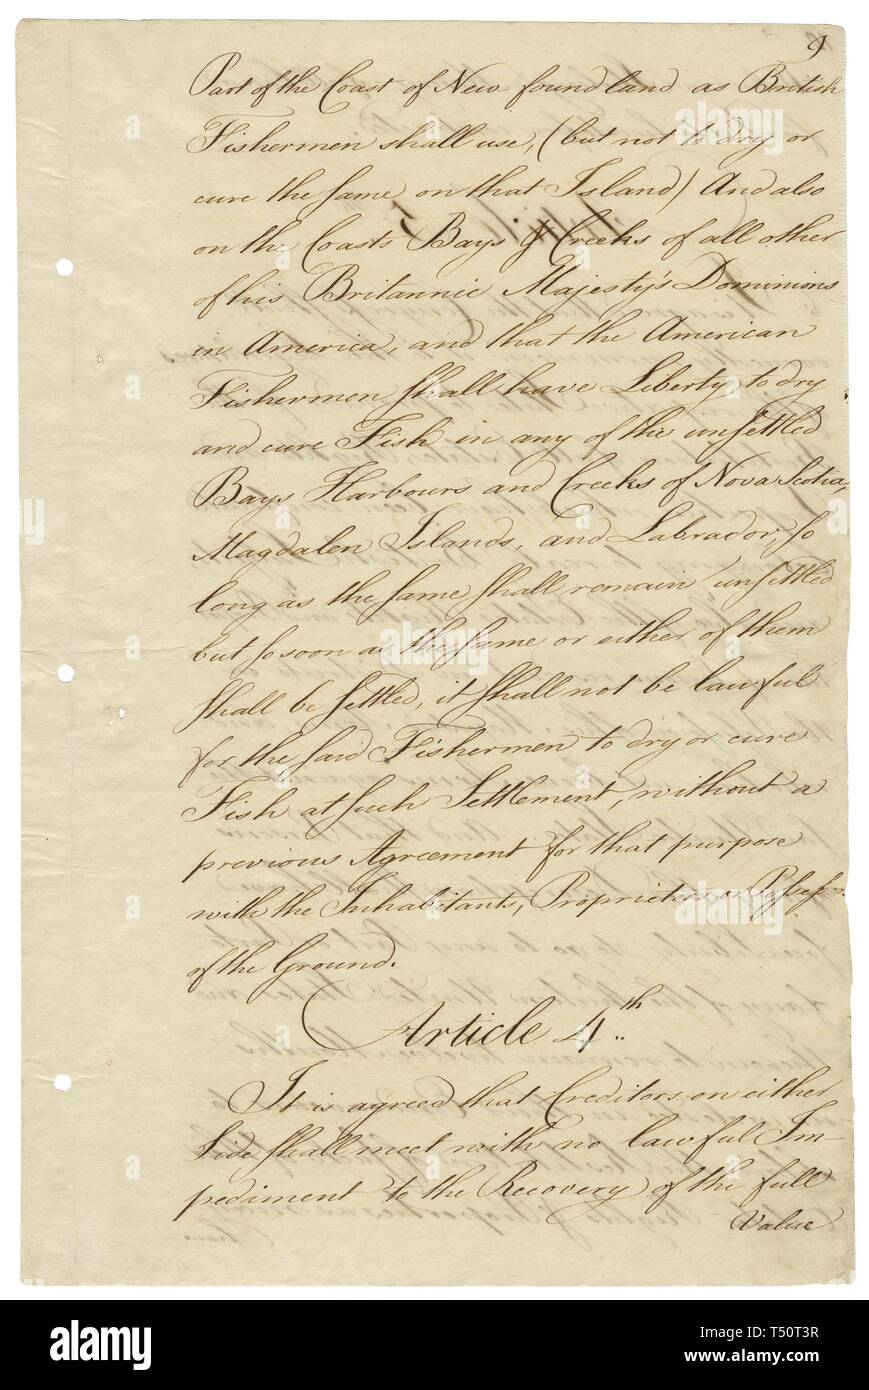 The Treaty of Paris, sent to Congress by the American negotiators John Adams, Benjamin Franklin, and John Jay, formally ended the Revolutionary War, 1783. Image courtesy National Archives. () Stock Photo